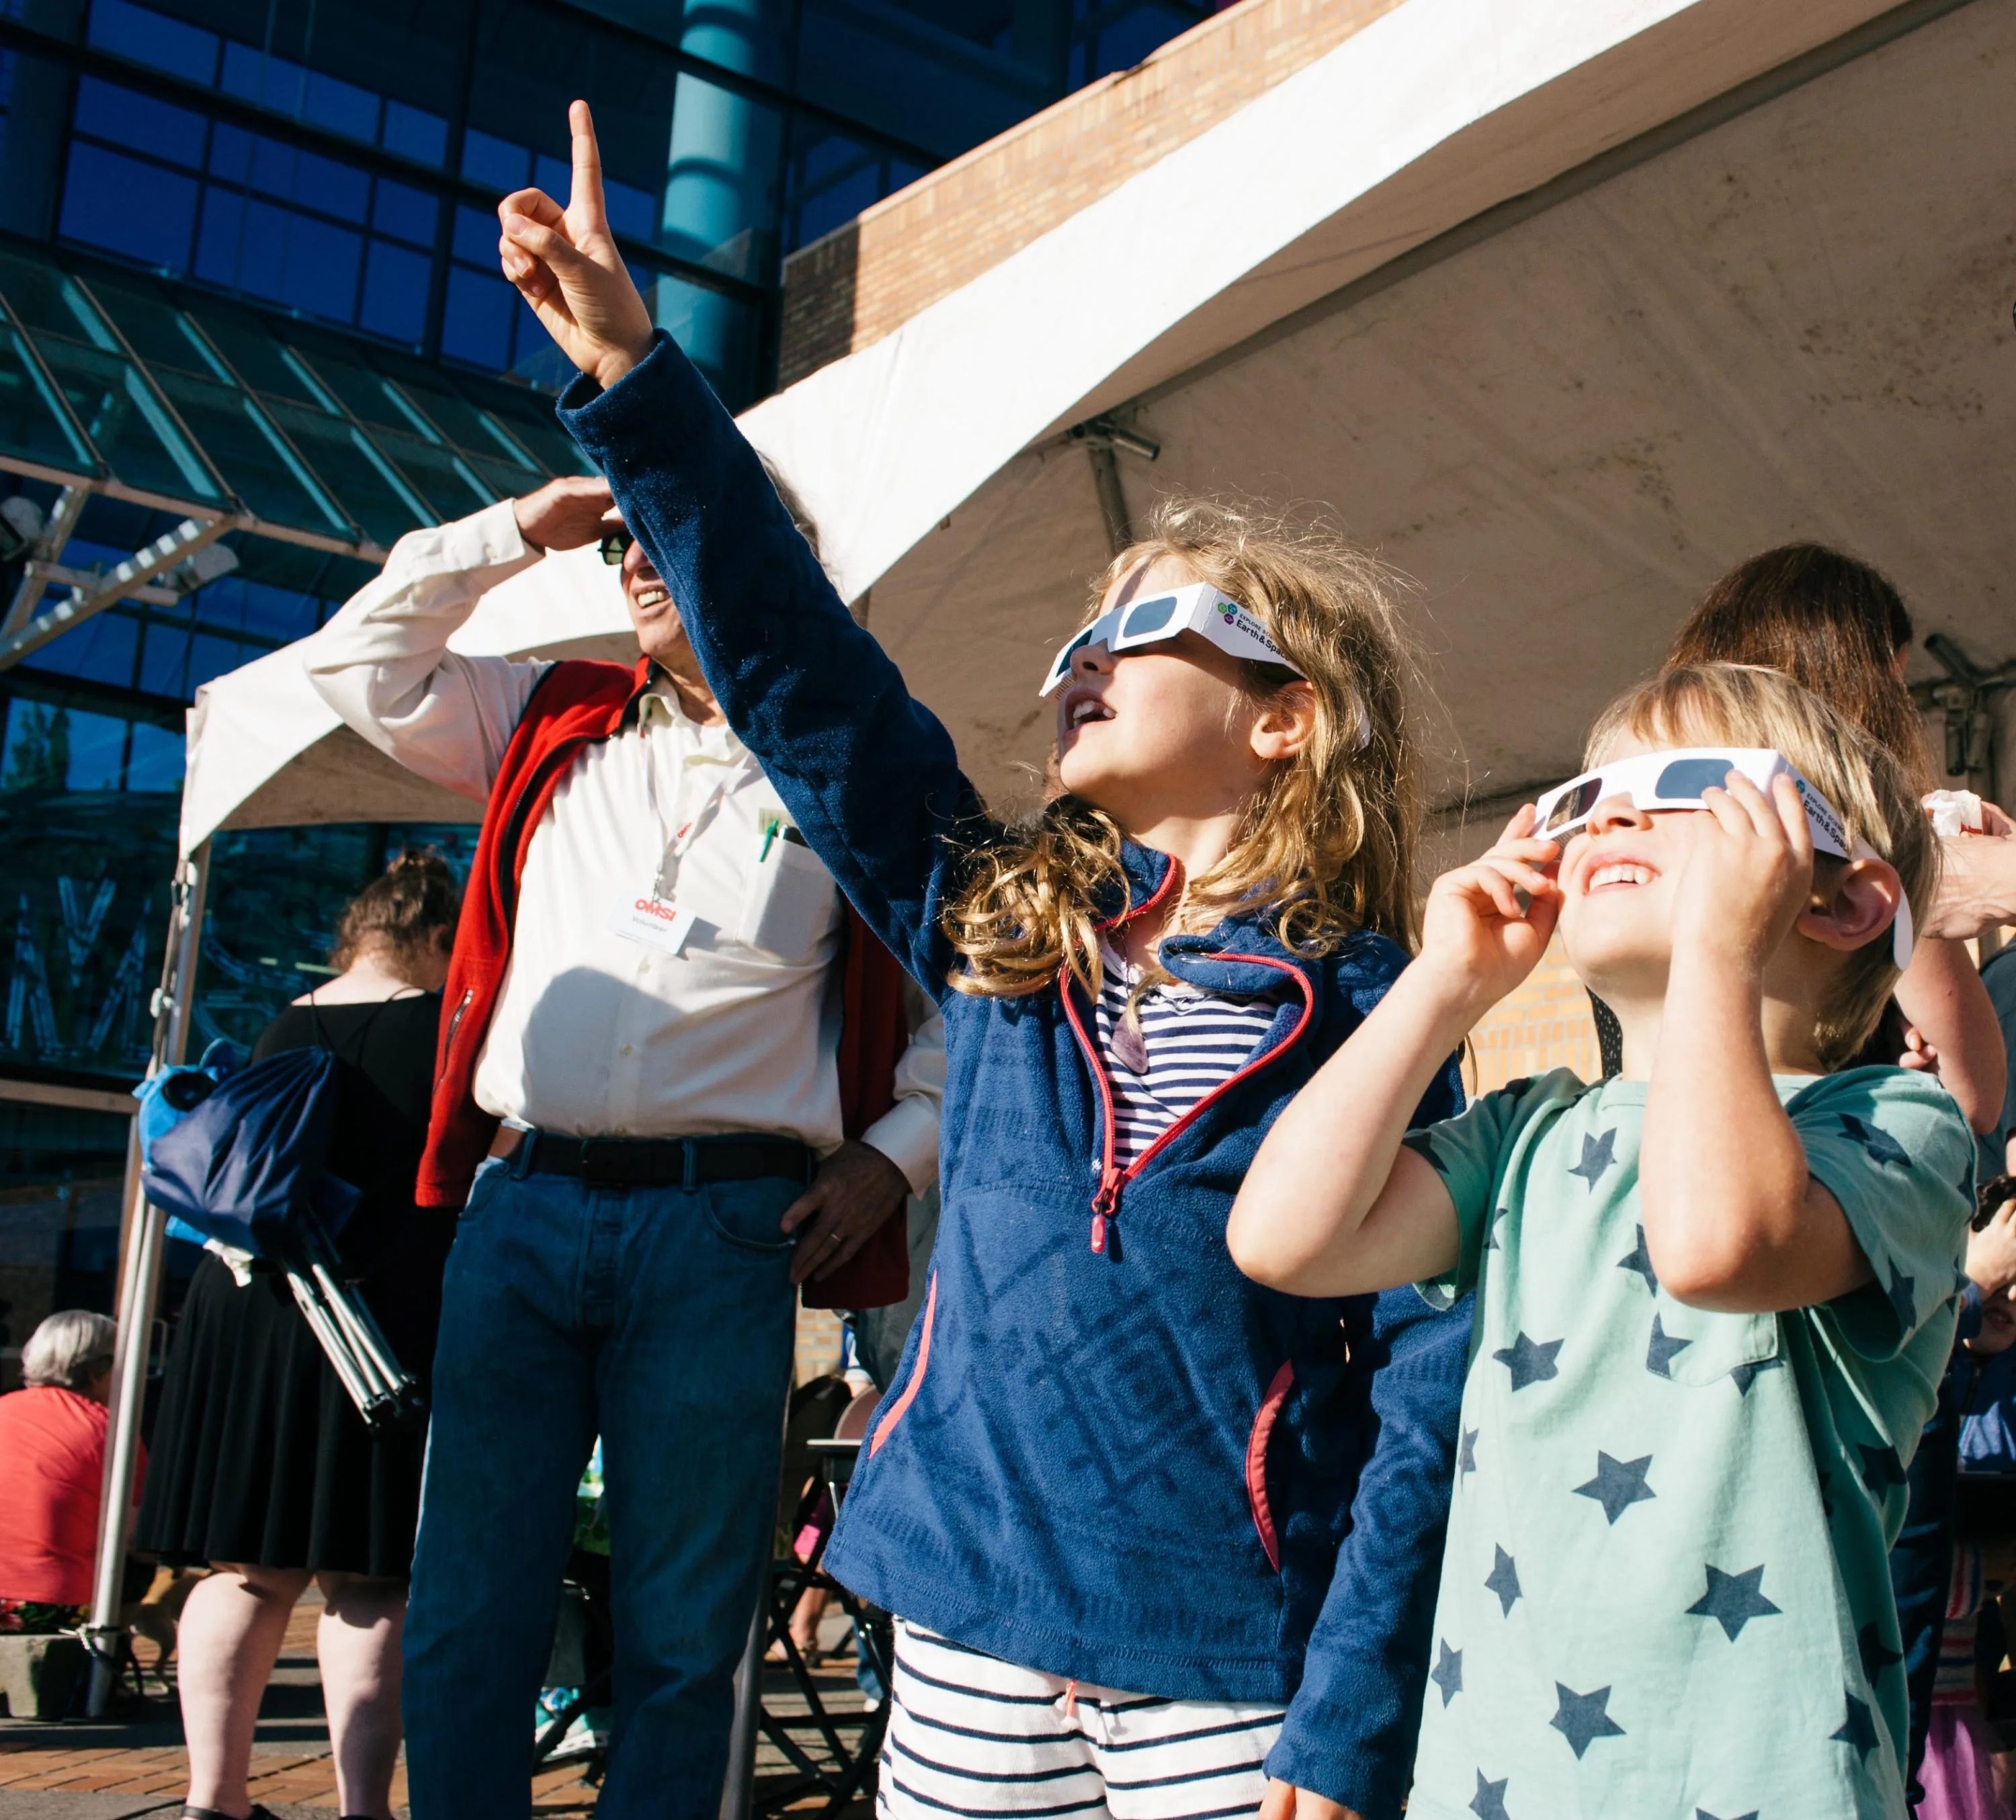 This photo shows families at a museum event, two young children in particular, safely viewing the 2017 solar eclipse while wearing safety glasses and pointing to the sky.